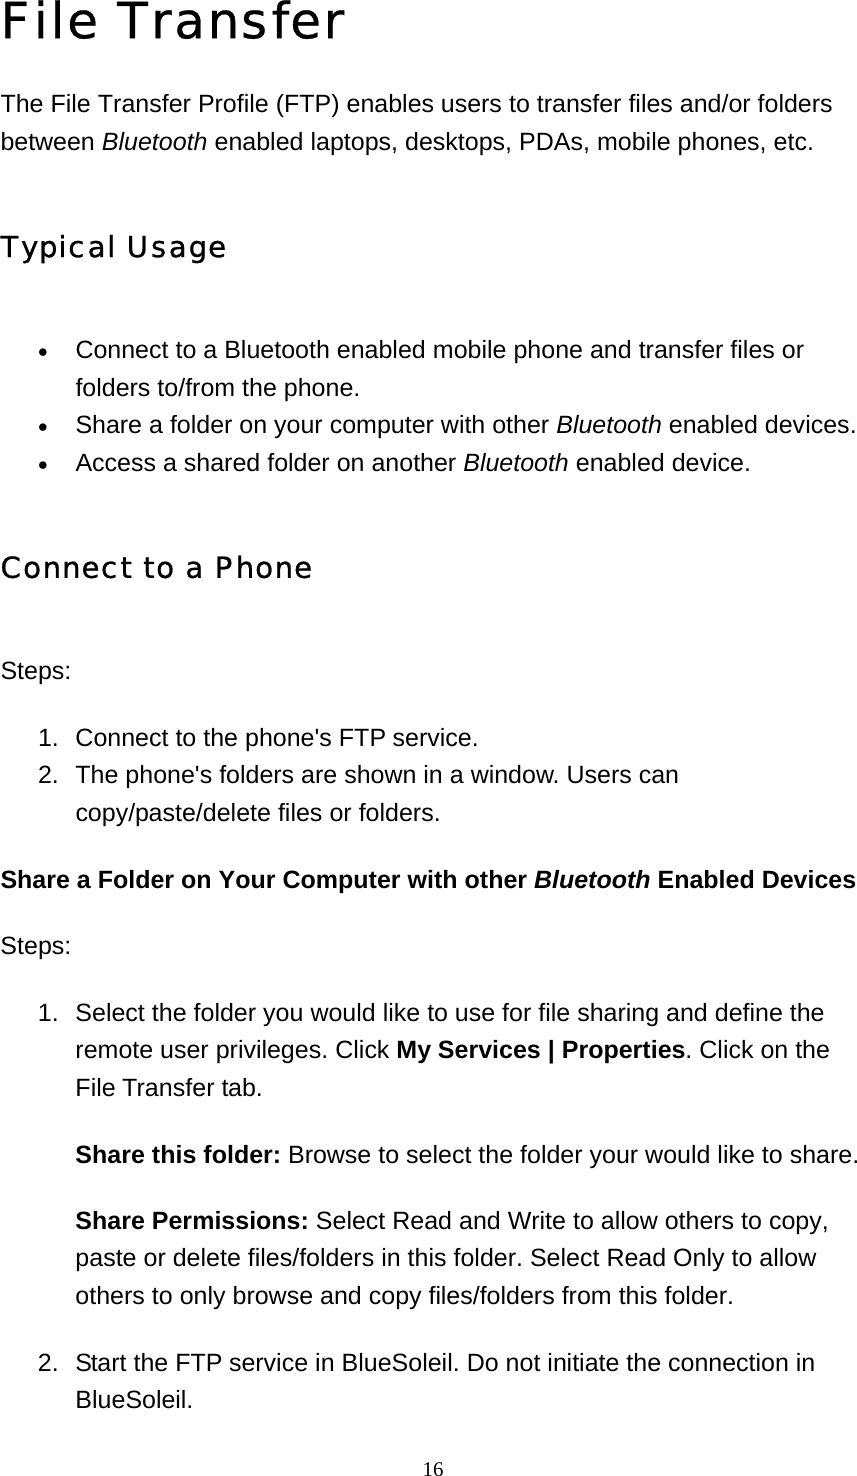   16File Transfer The File Transfer Profile (FTP) enables users to transfer files and/or folders between Bluetooth enabled laptops, desktops, PDAs, mobile phones, etc. Typical Usage • Connect to a Bluetooth enabled mobile phone and transfer files or folders to/from the phone.   • Share a folder on your computer with other Bluetooth enabled devices.   • Access a shared folder on another Bluetooth enabled device.   Connect to a Phone Steps: 1.  Connect to the phone&apos;s FTP service.   2.  The phone&apos;s folders are shown in a window. Users can copy/paste/delete files or folders.   Share a Folder on Your Computer with other Bluetooth Enabled Devices Steps: 1.  Select the folder you would like to use for file sharing and define the remote user privileges. Click My Services | Properties. Click on the File Transfer tab.   Share this folder: Browse to select the folder your would like to share. Share Permissions: Select Read and Write to allow others to copy, paste or delete files/folders in this folder. Select Read Only to allow others to only browse and copy files/folders from this folder. 2.  Start the FTP service in BlueSoleil. Do not initiate the connection in BlueSoleil.  